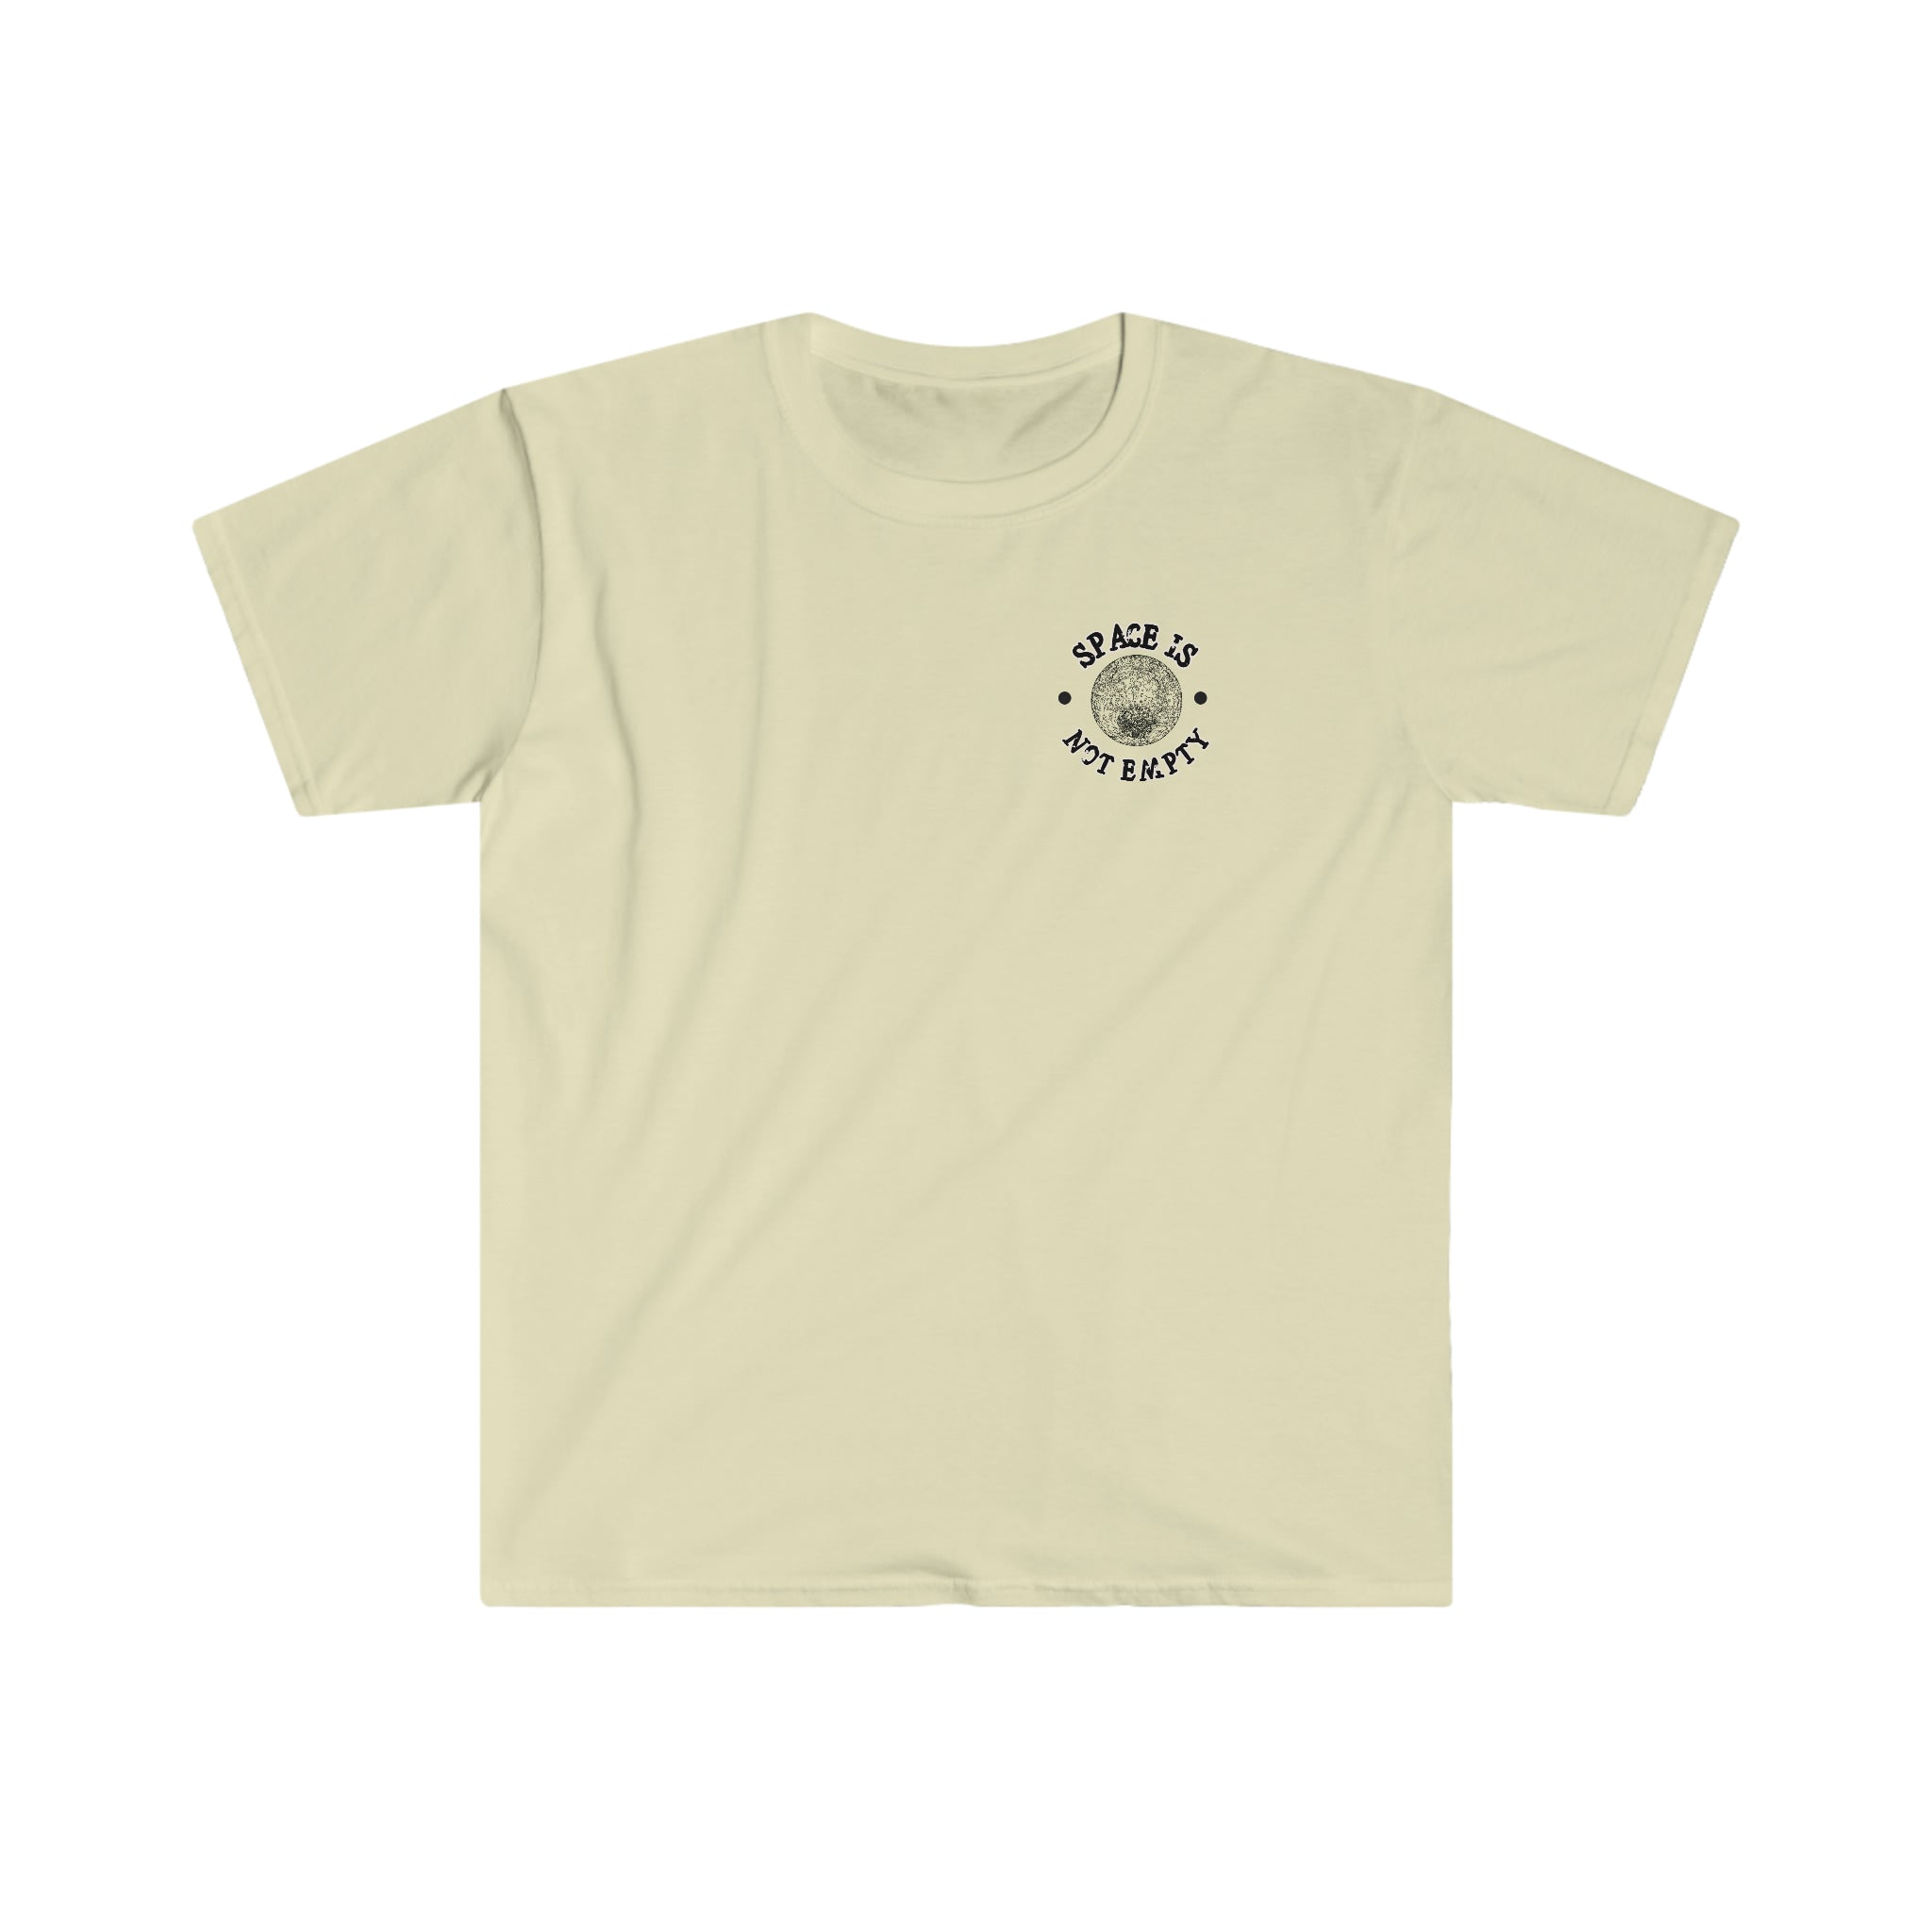 A Deep Deep Space beige t-shirt with a black logo on it. (Brand: One Tee Project)